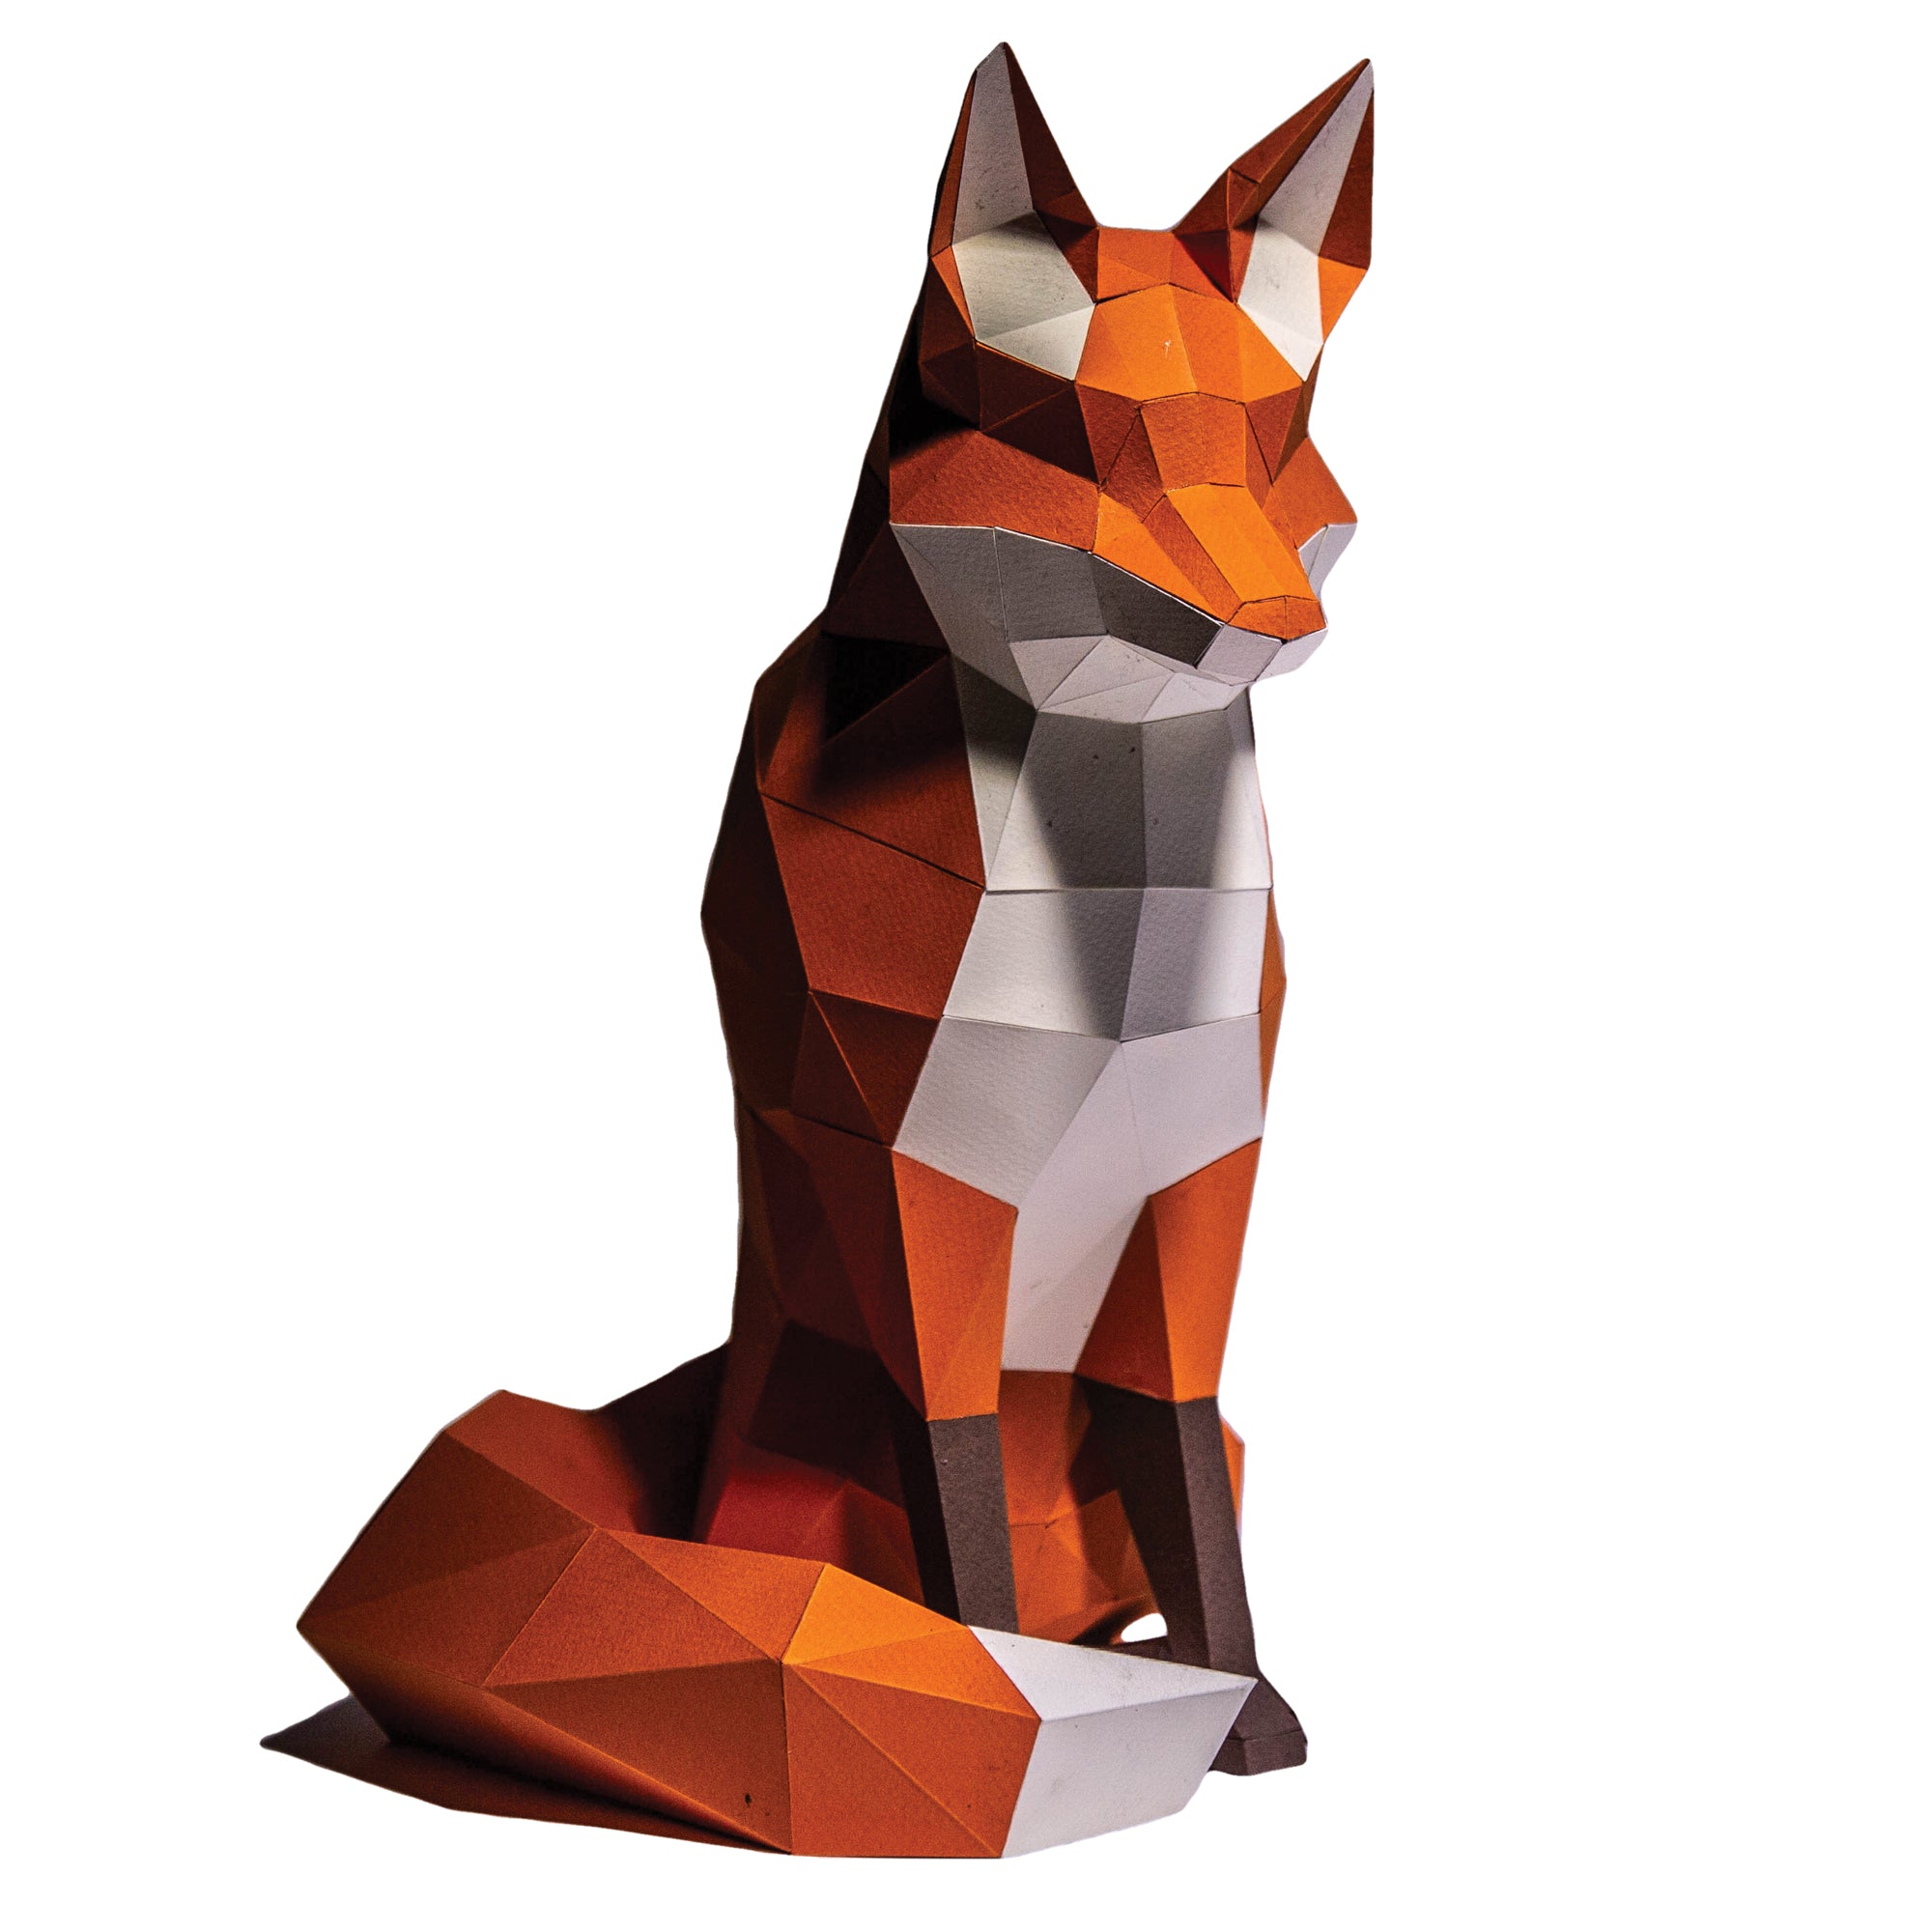 Papercraft fox on a white background. Geometrical-shaped fox that is folded and cut paper pieces glued together. Fox is mainly a dark orange with black paws and a white chest, chin area, inside ears, and tip of tail.